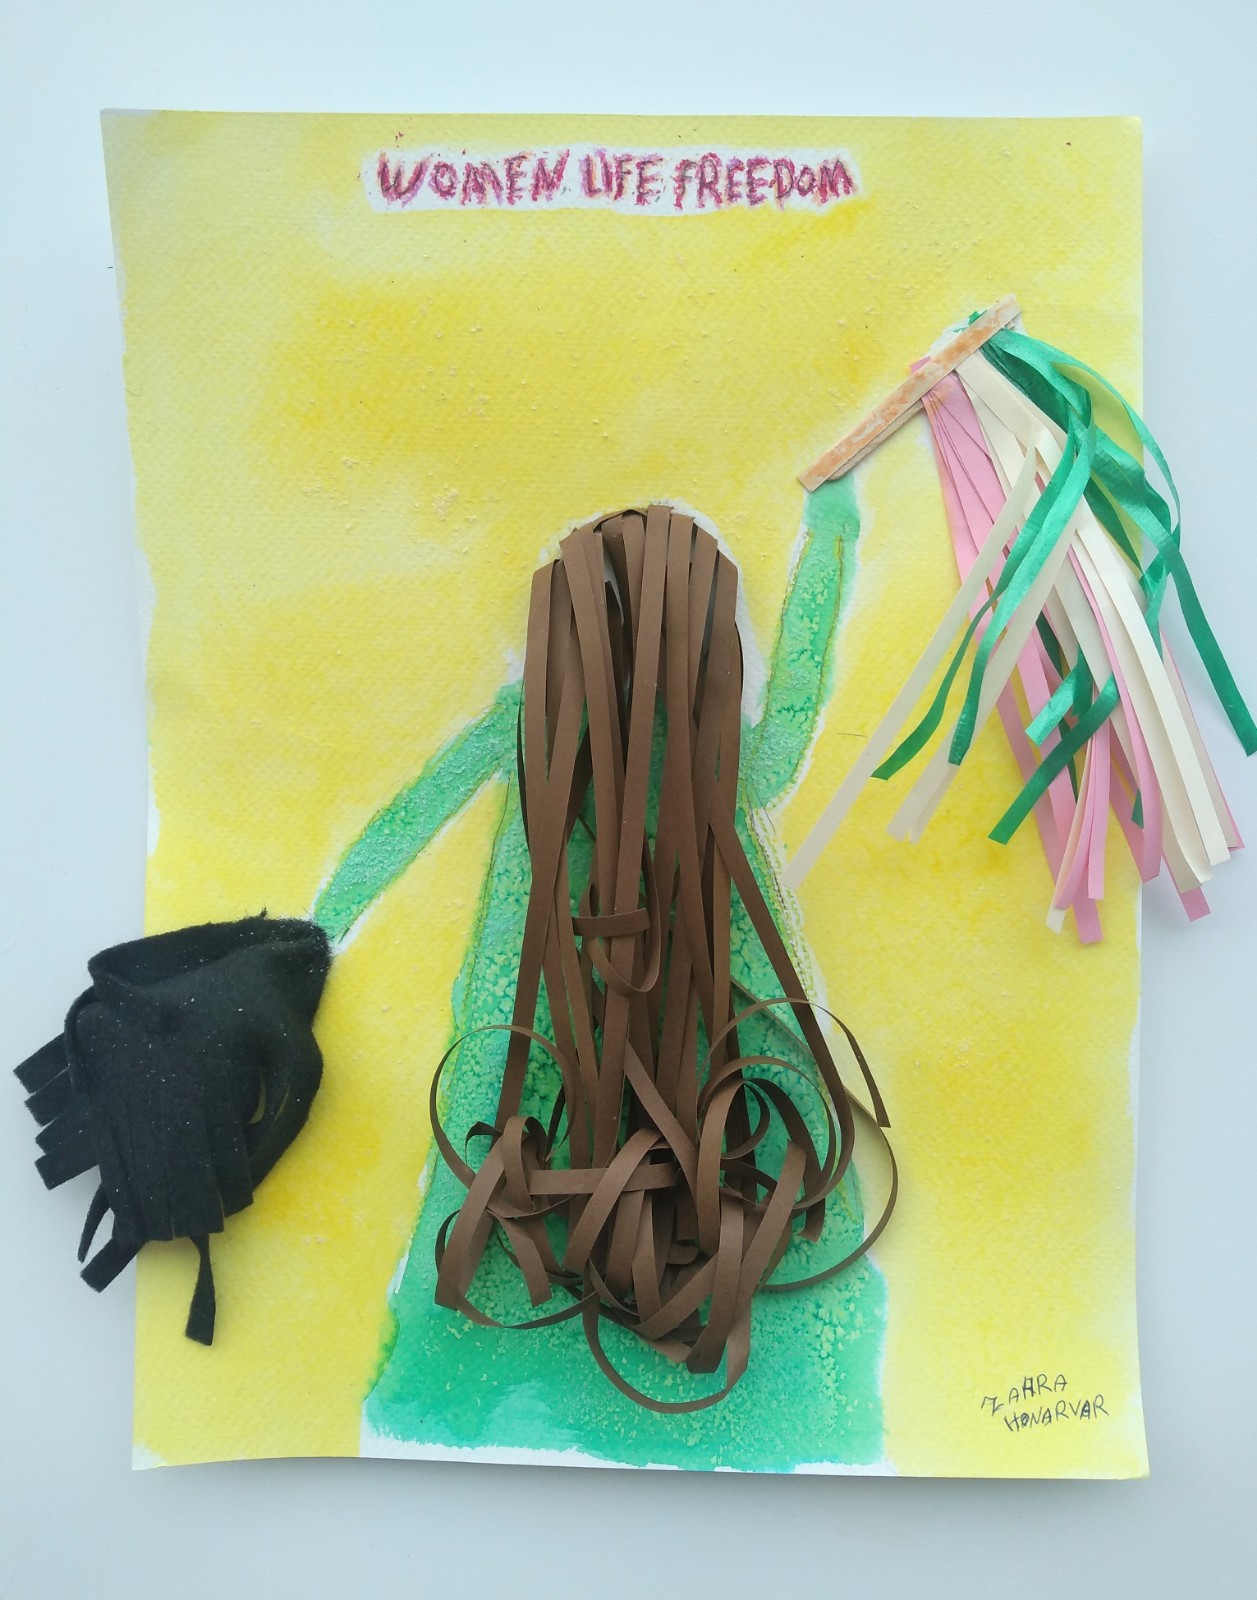 A yellow background piece with text at the top "Women Life Freedom". The back of a person in green holds pom pom per hand and brown hair. Both the pompoms and hair are 3-D.